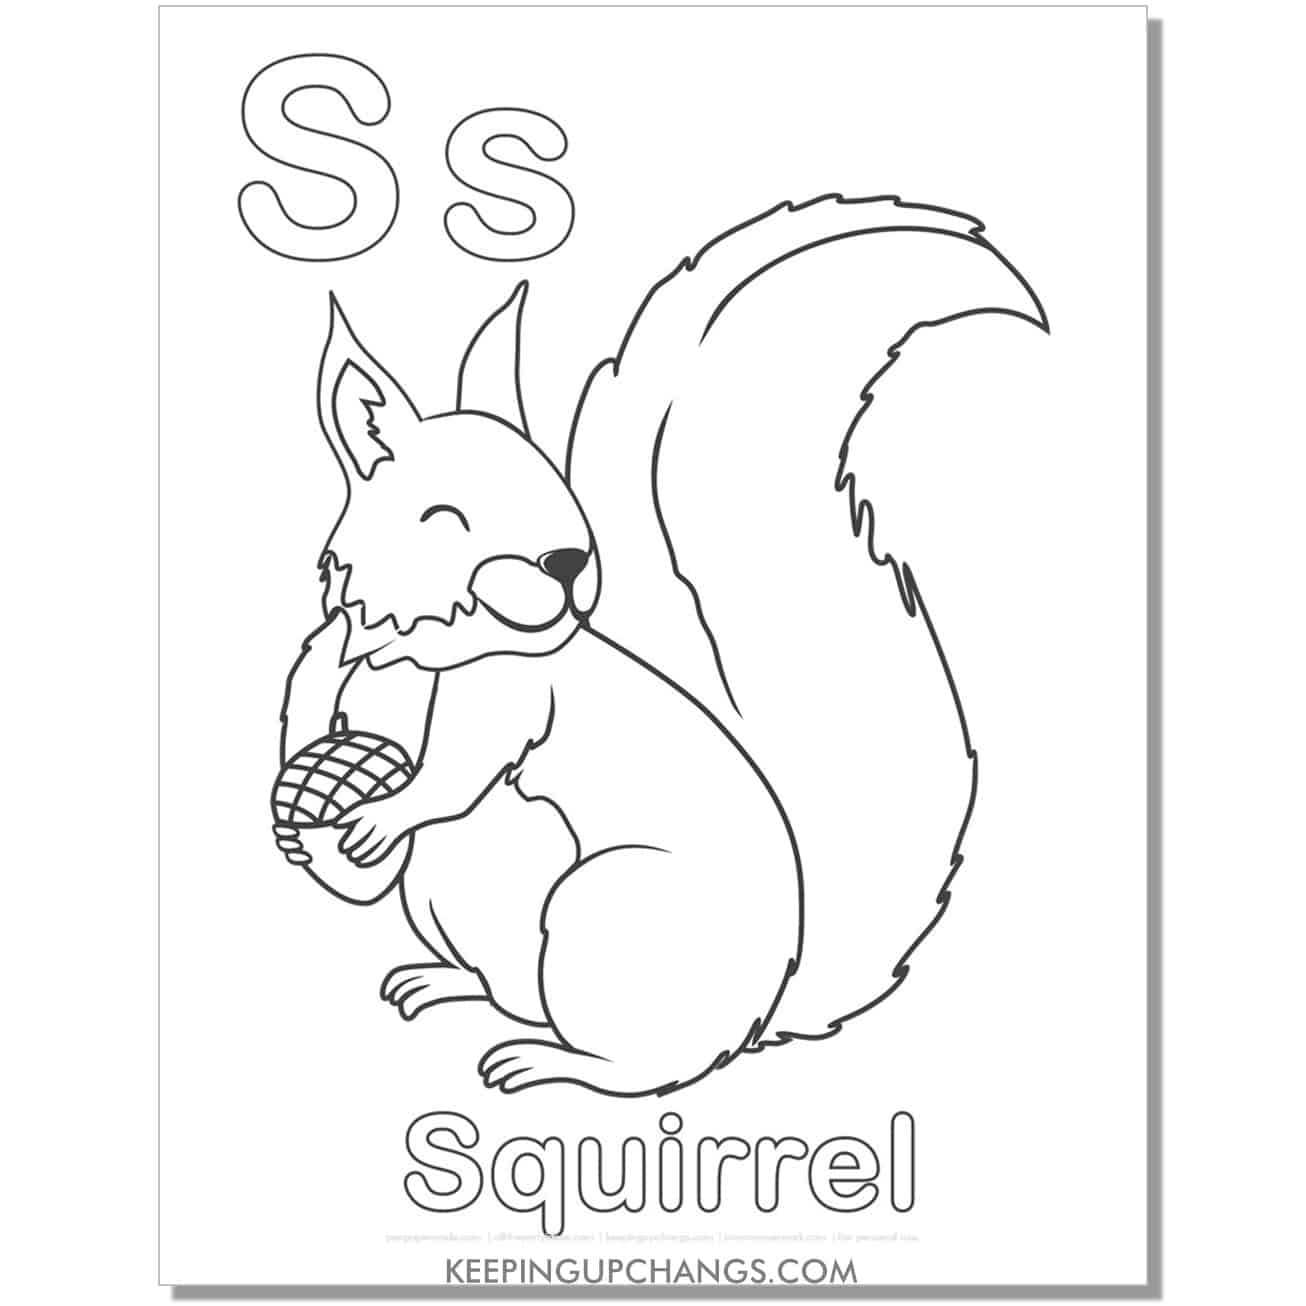 abc coloring sheet, s for squirrel.